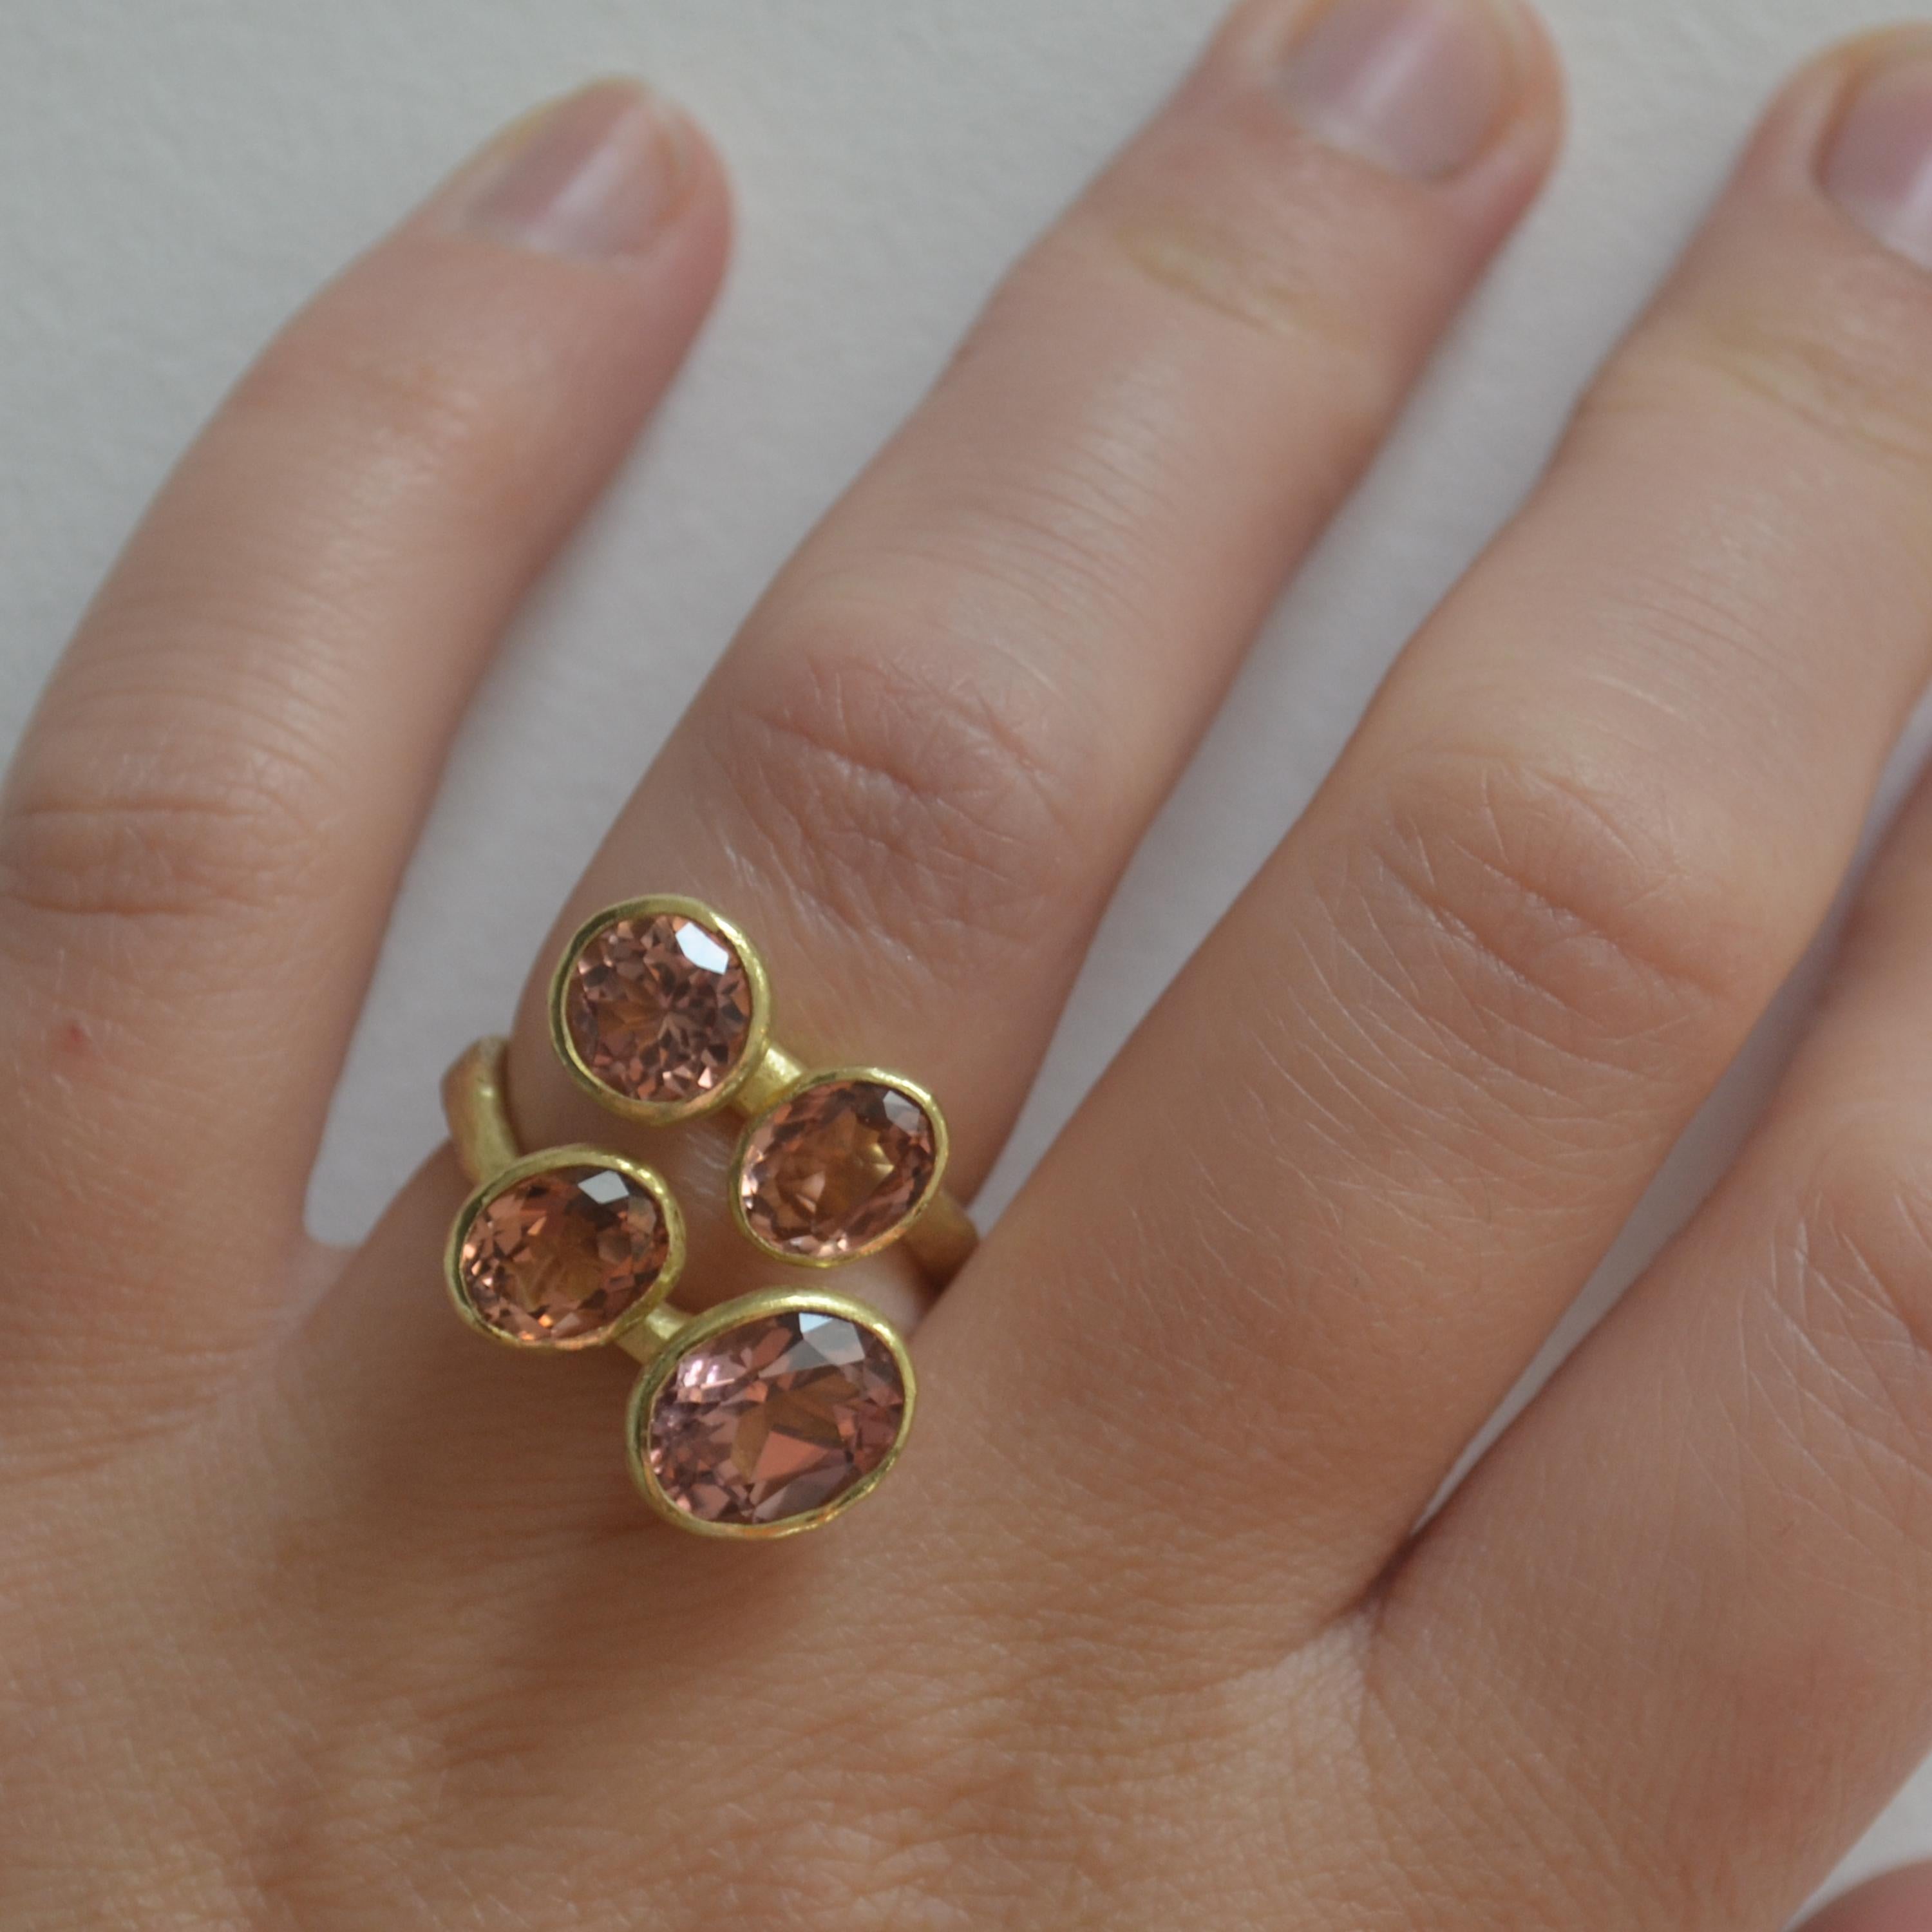 18k gold handmade textured cocktail ring with four pink tourmalines. The largest oval tourmaline is a beautiful rose hue while the surrounding three tourmalines have warm peach tones. Faceted for maximum sparkle and placed to all face upwards to